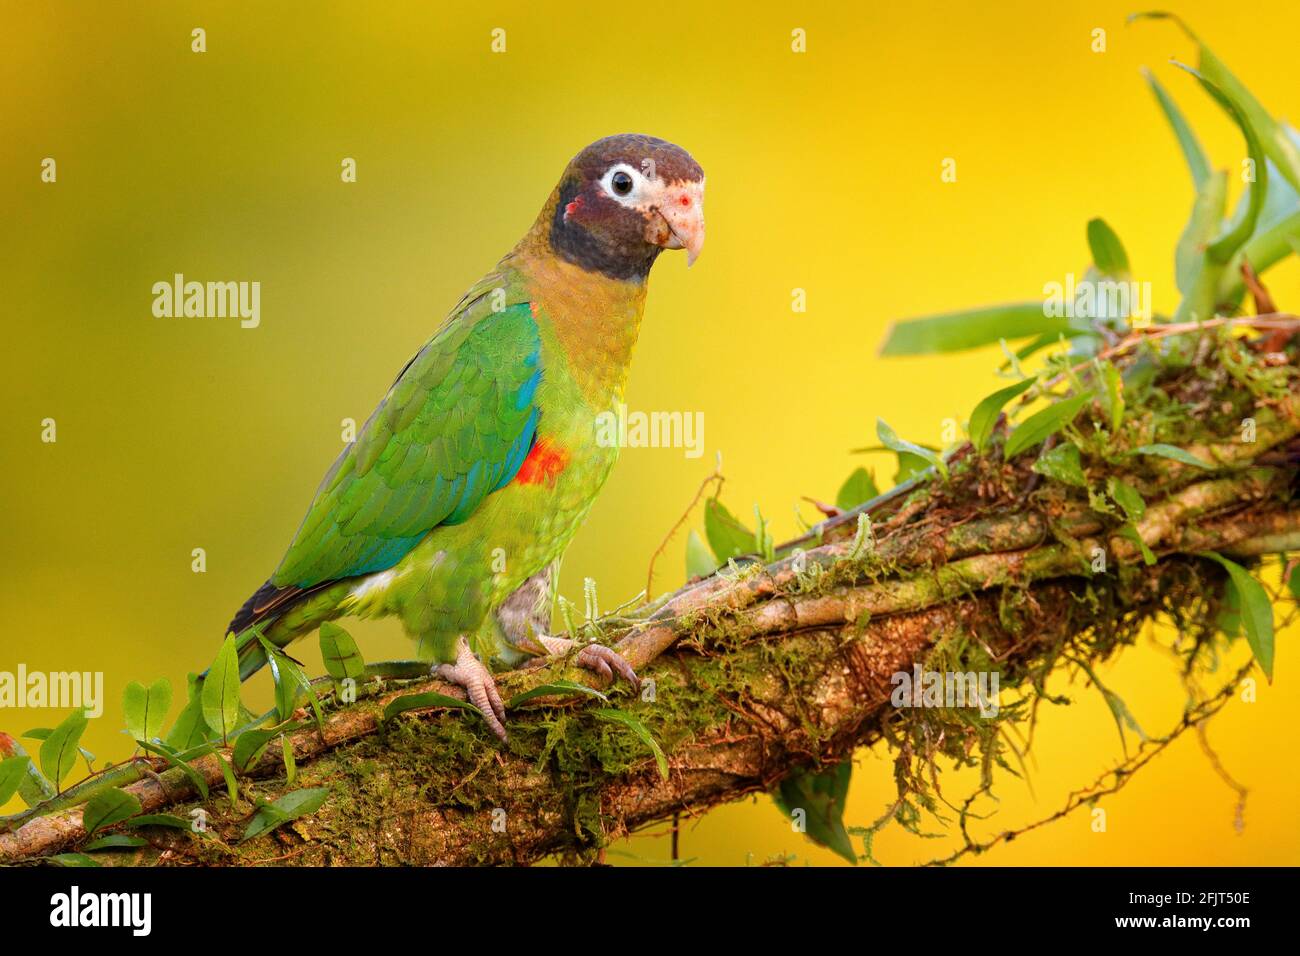 Brown-hooded Parrot, Pionopsitta haematotis, portrait of light green parrot with brown head. Detail close-up portrait of bird from Central America. Wi Stock Photo